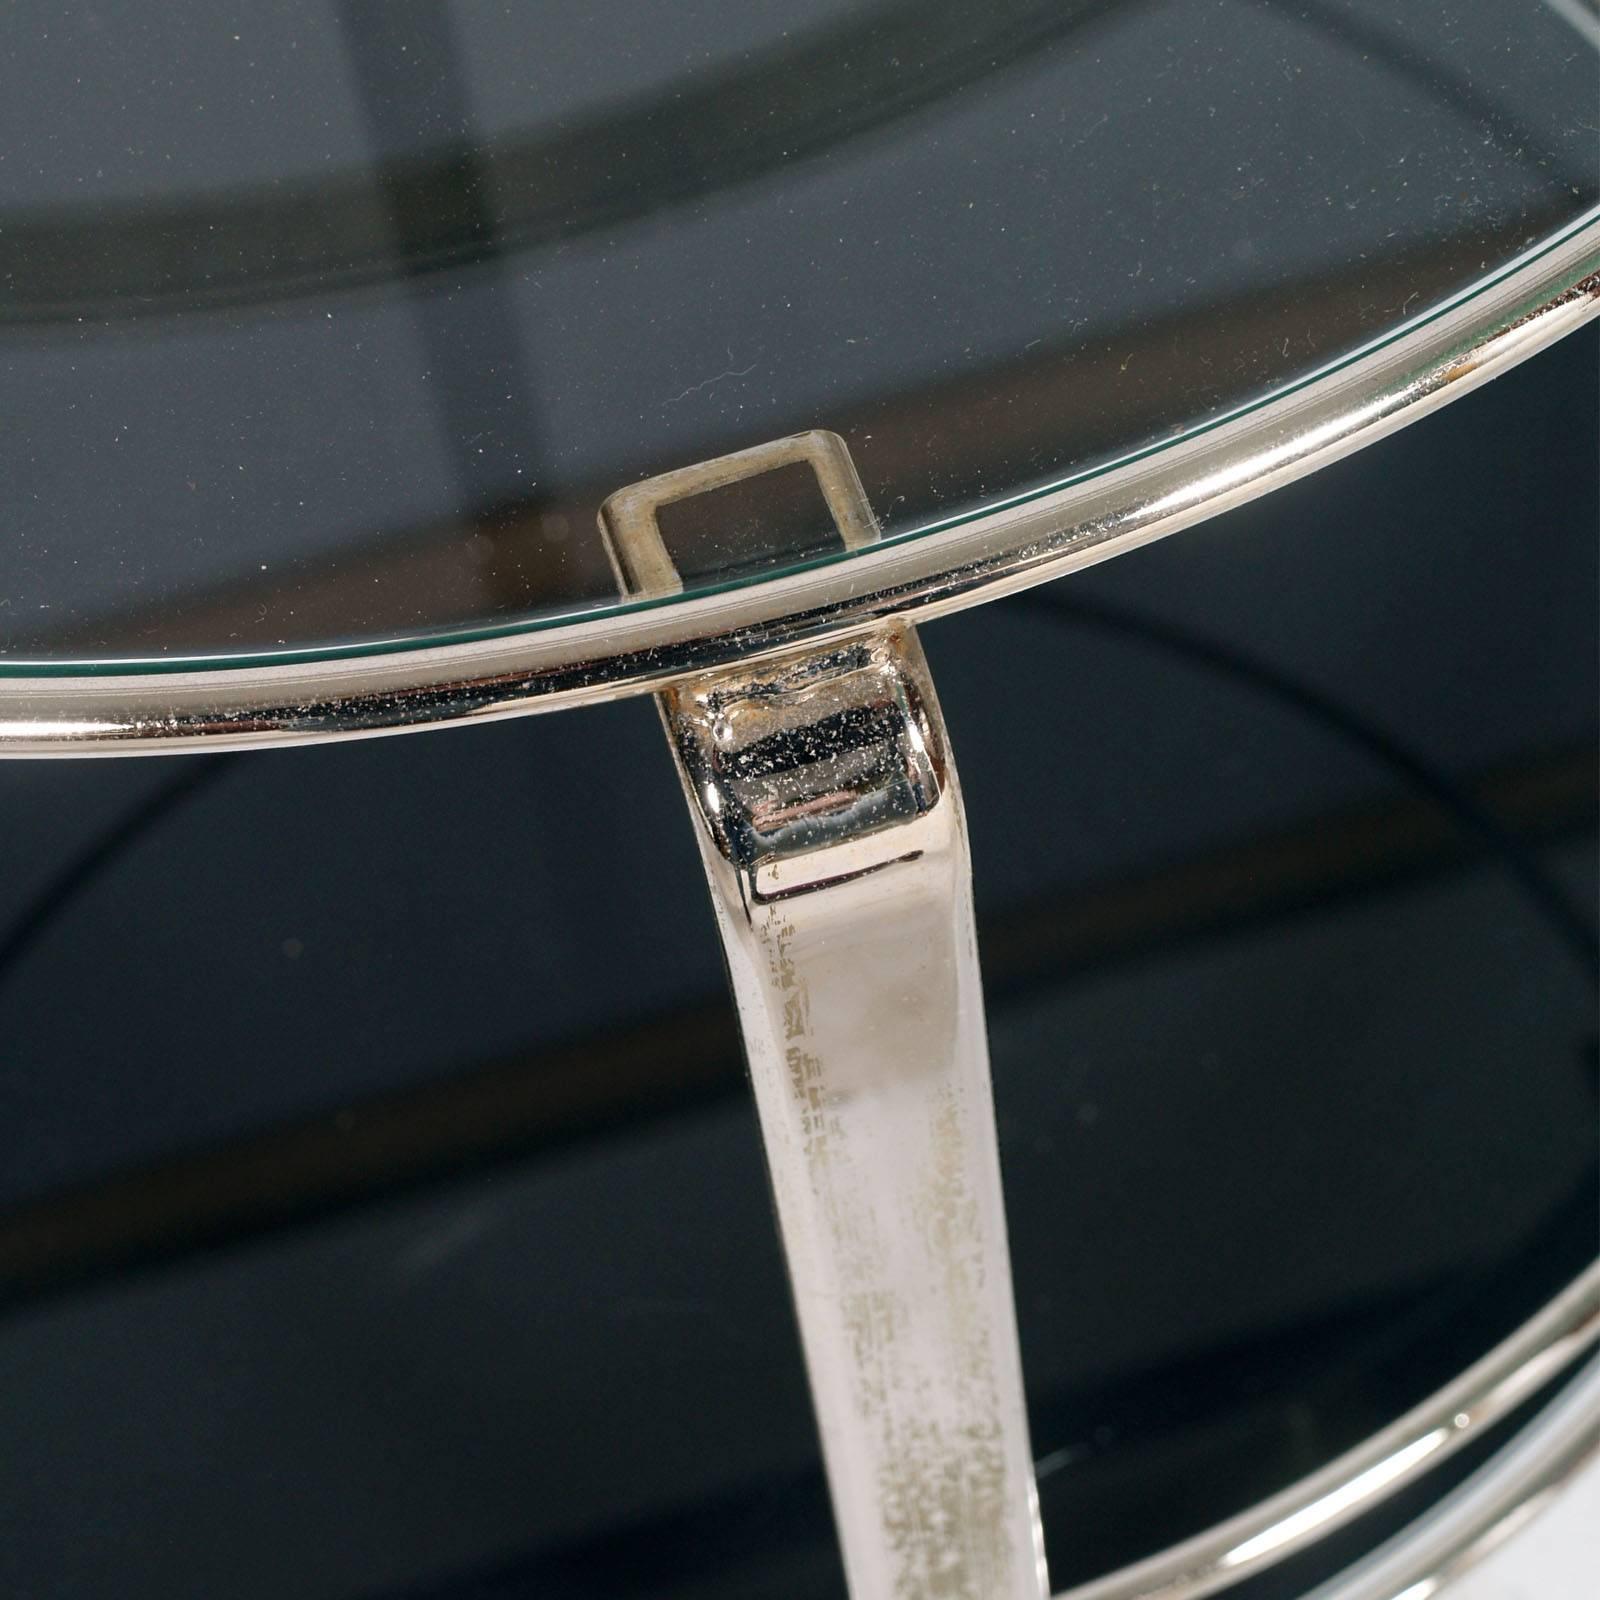 French 1970s metal chrome round cocktail bar cart with under smoked glass and transparent crystal above.
Excellent conditions
Measures in cm: Height 80, diameter 65.